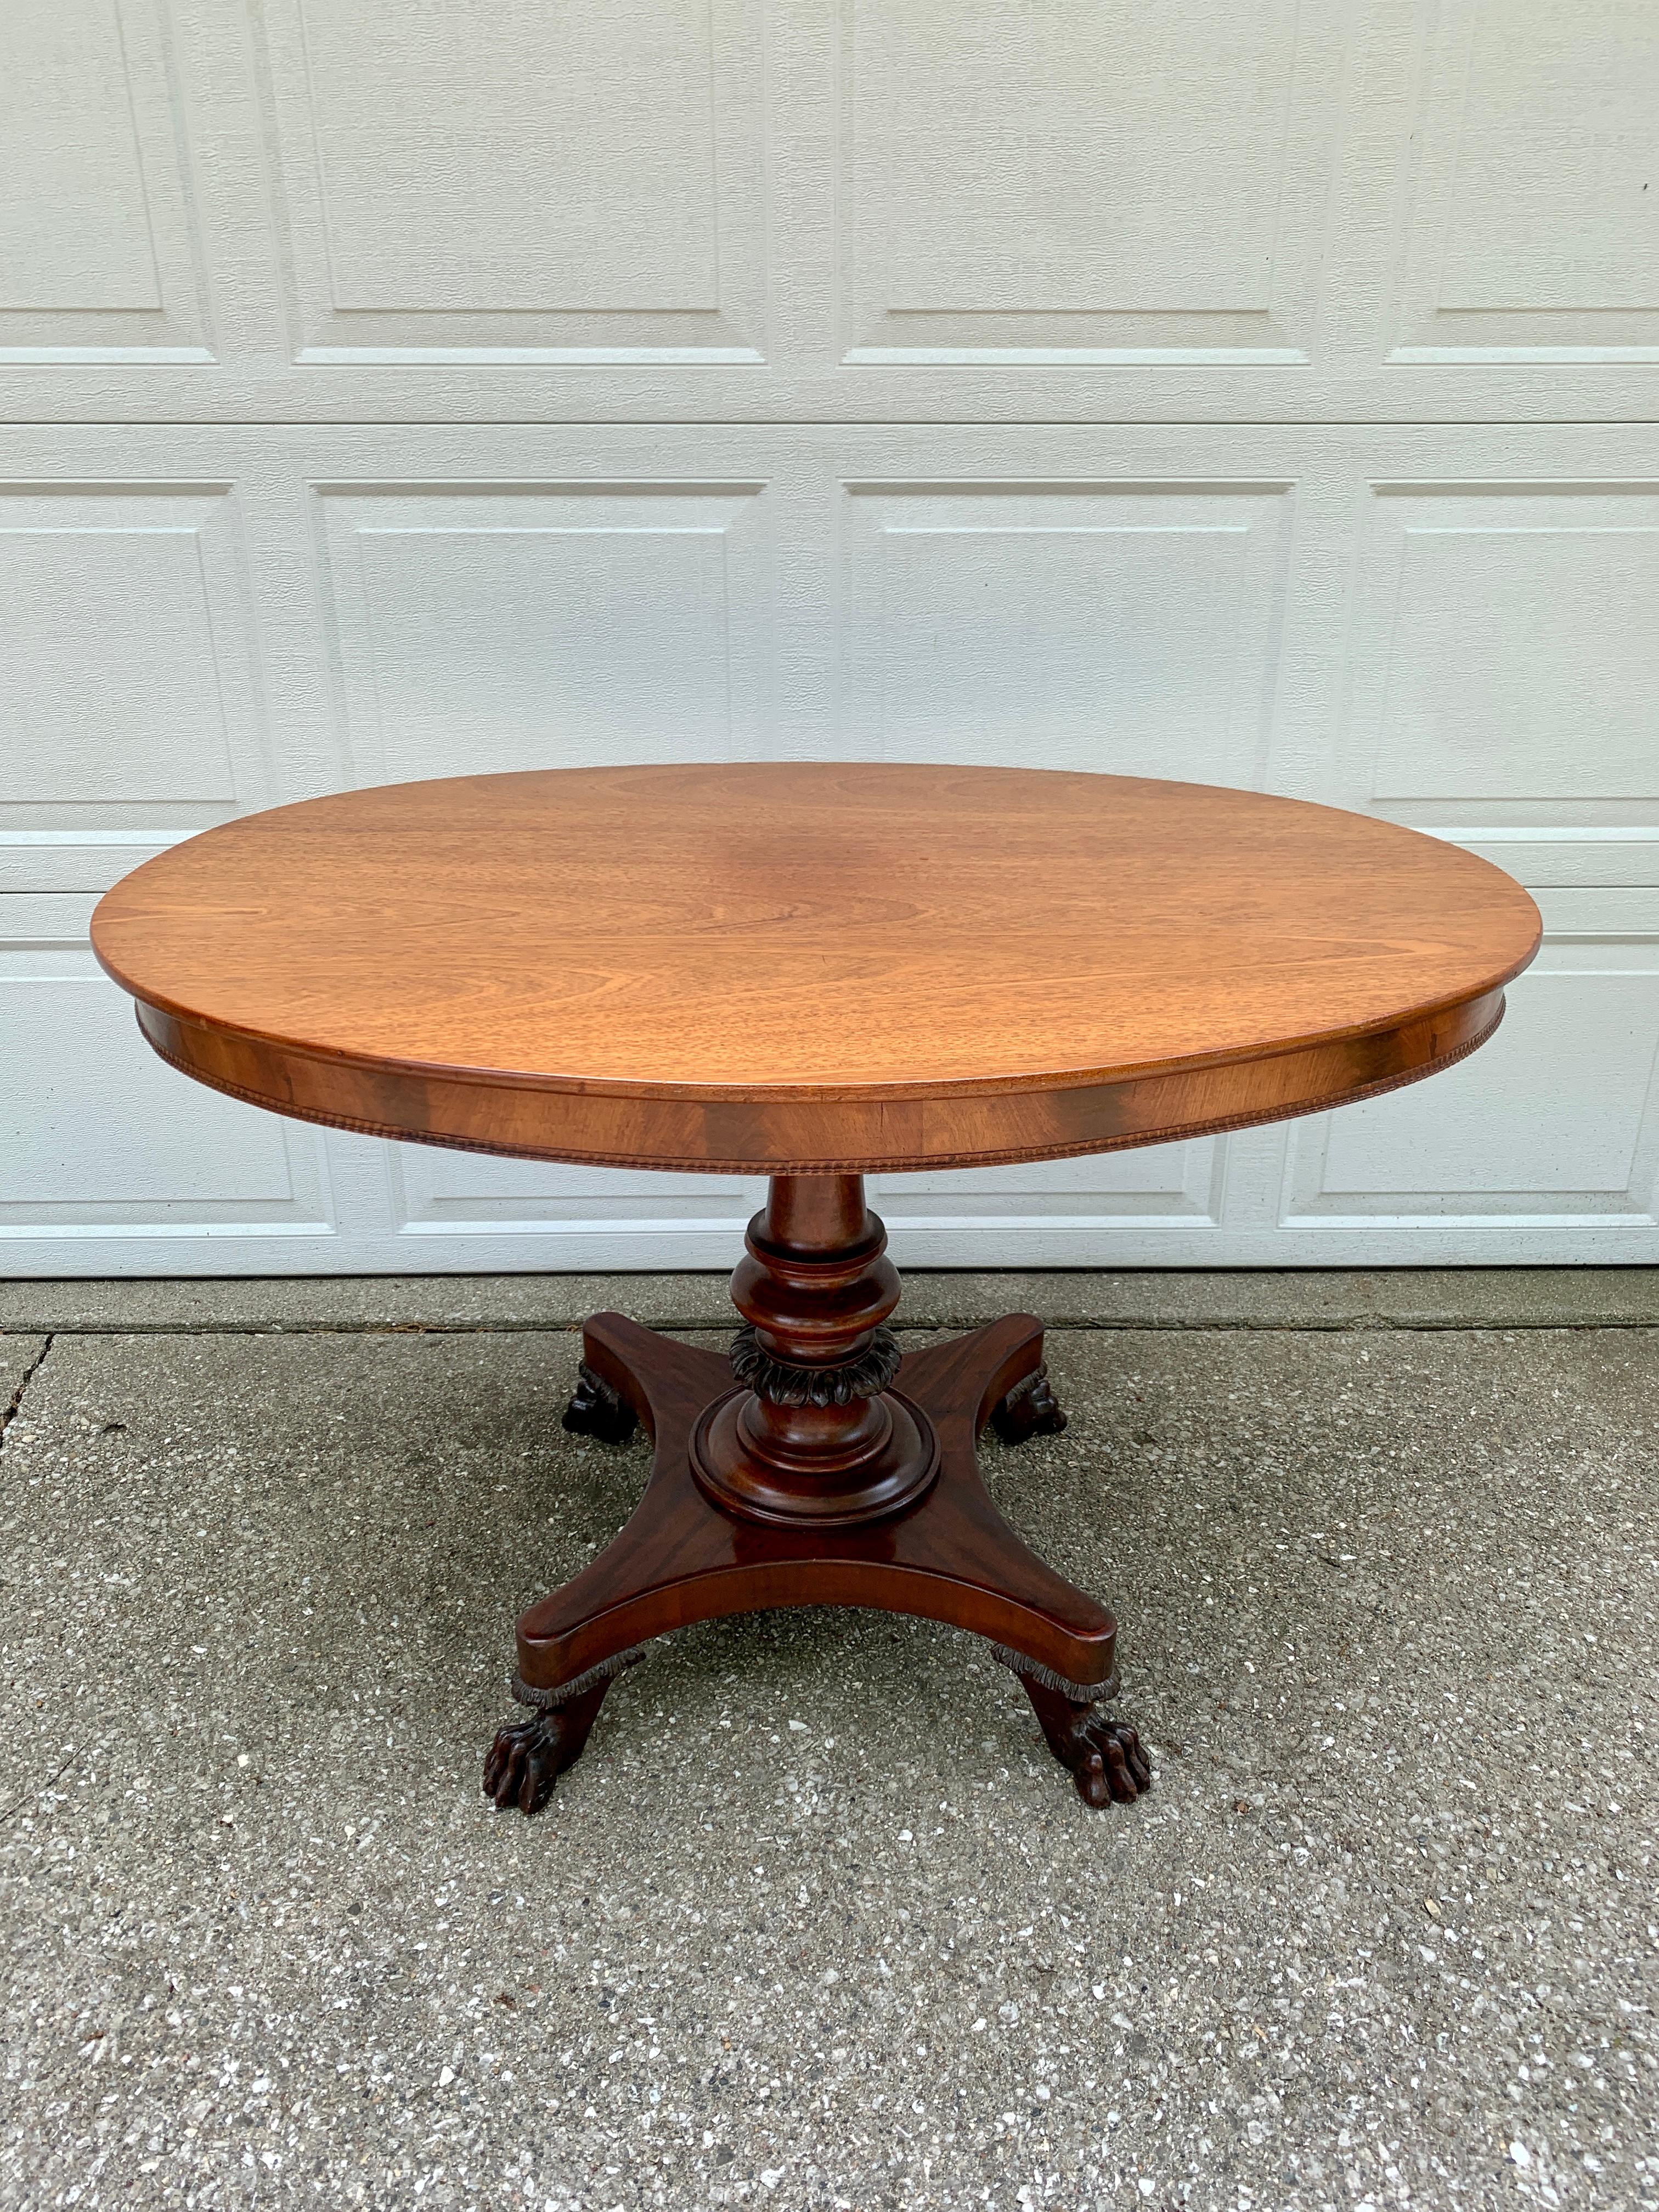 A stunning antique American Empire mahogany pedestal center table or console table with lion paw feet

USA, late 19th century

Measures: 46.75